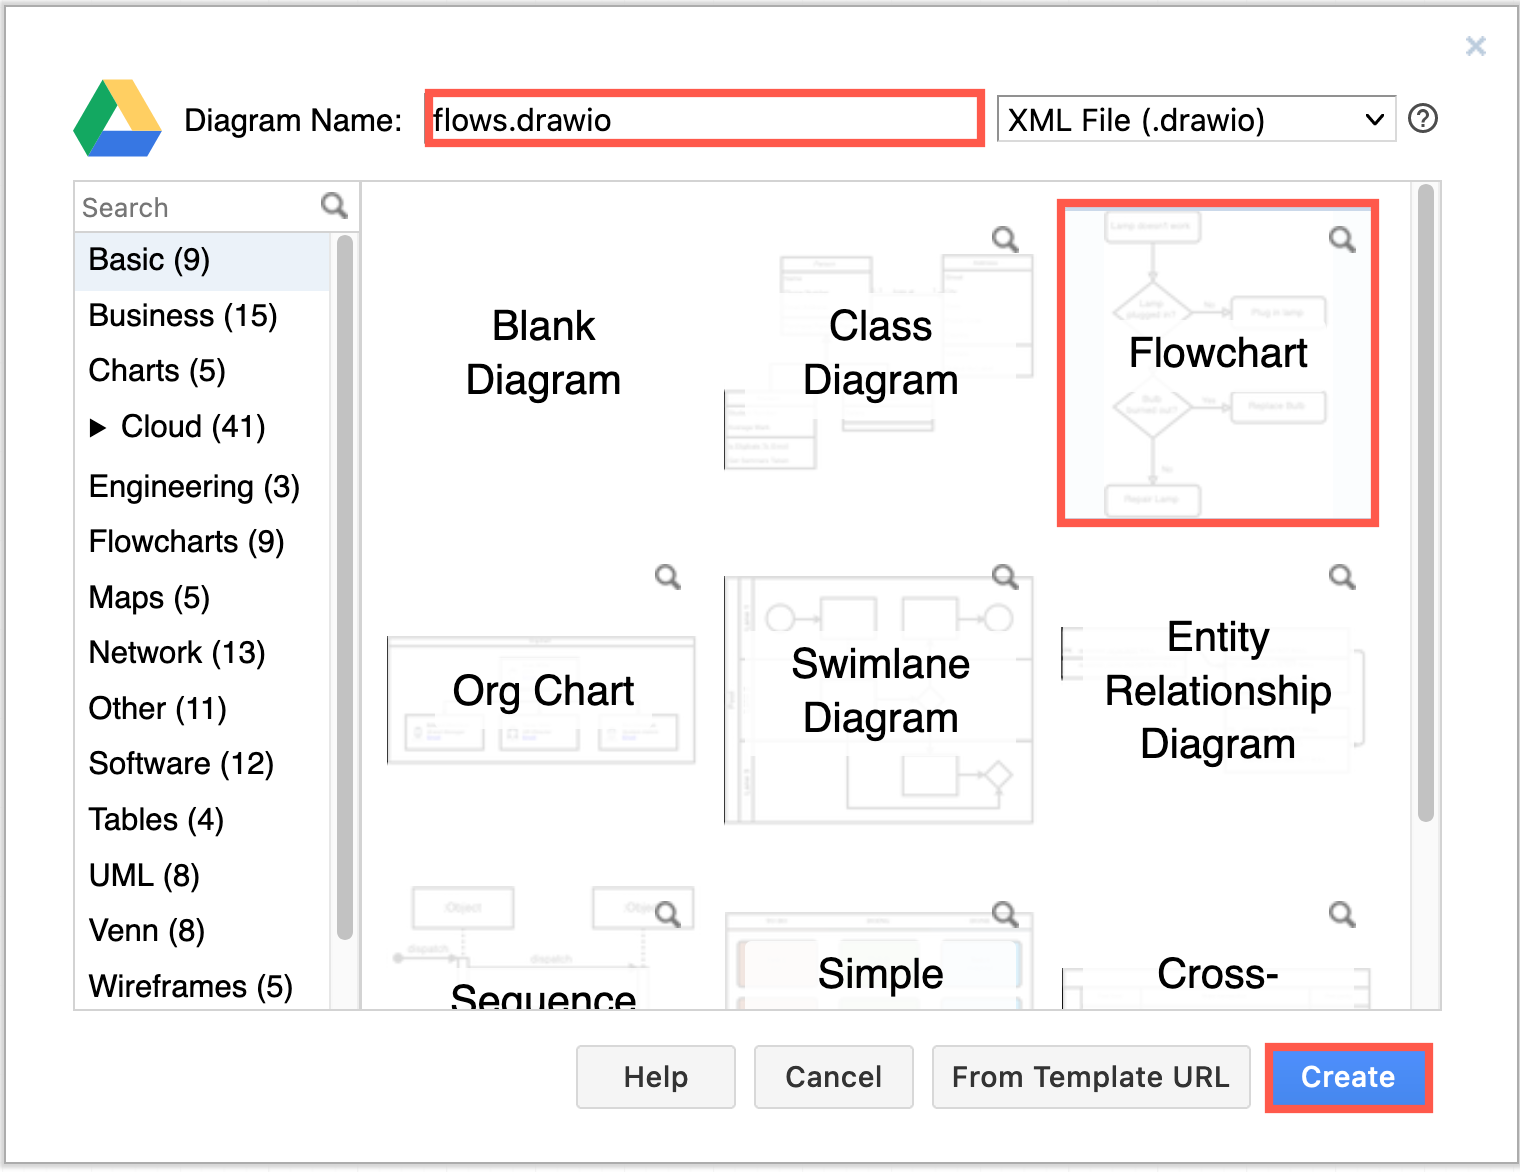 Select a template and enter a diagram name to create a new diagram in Google Drive